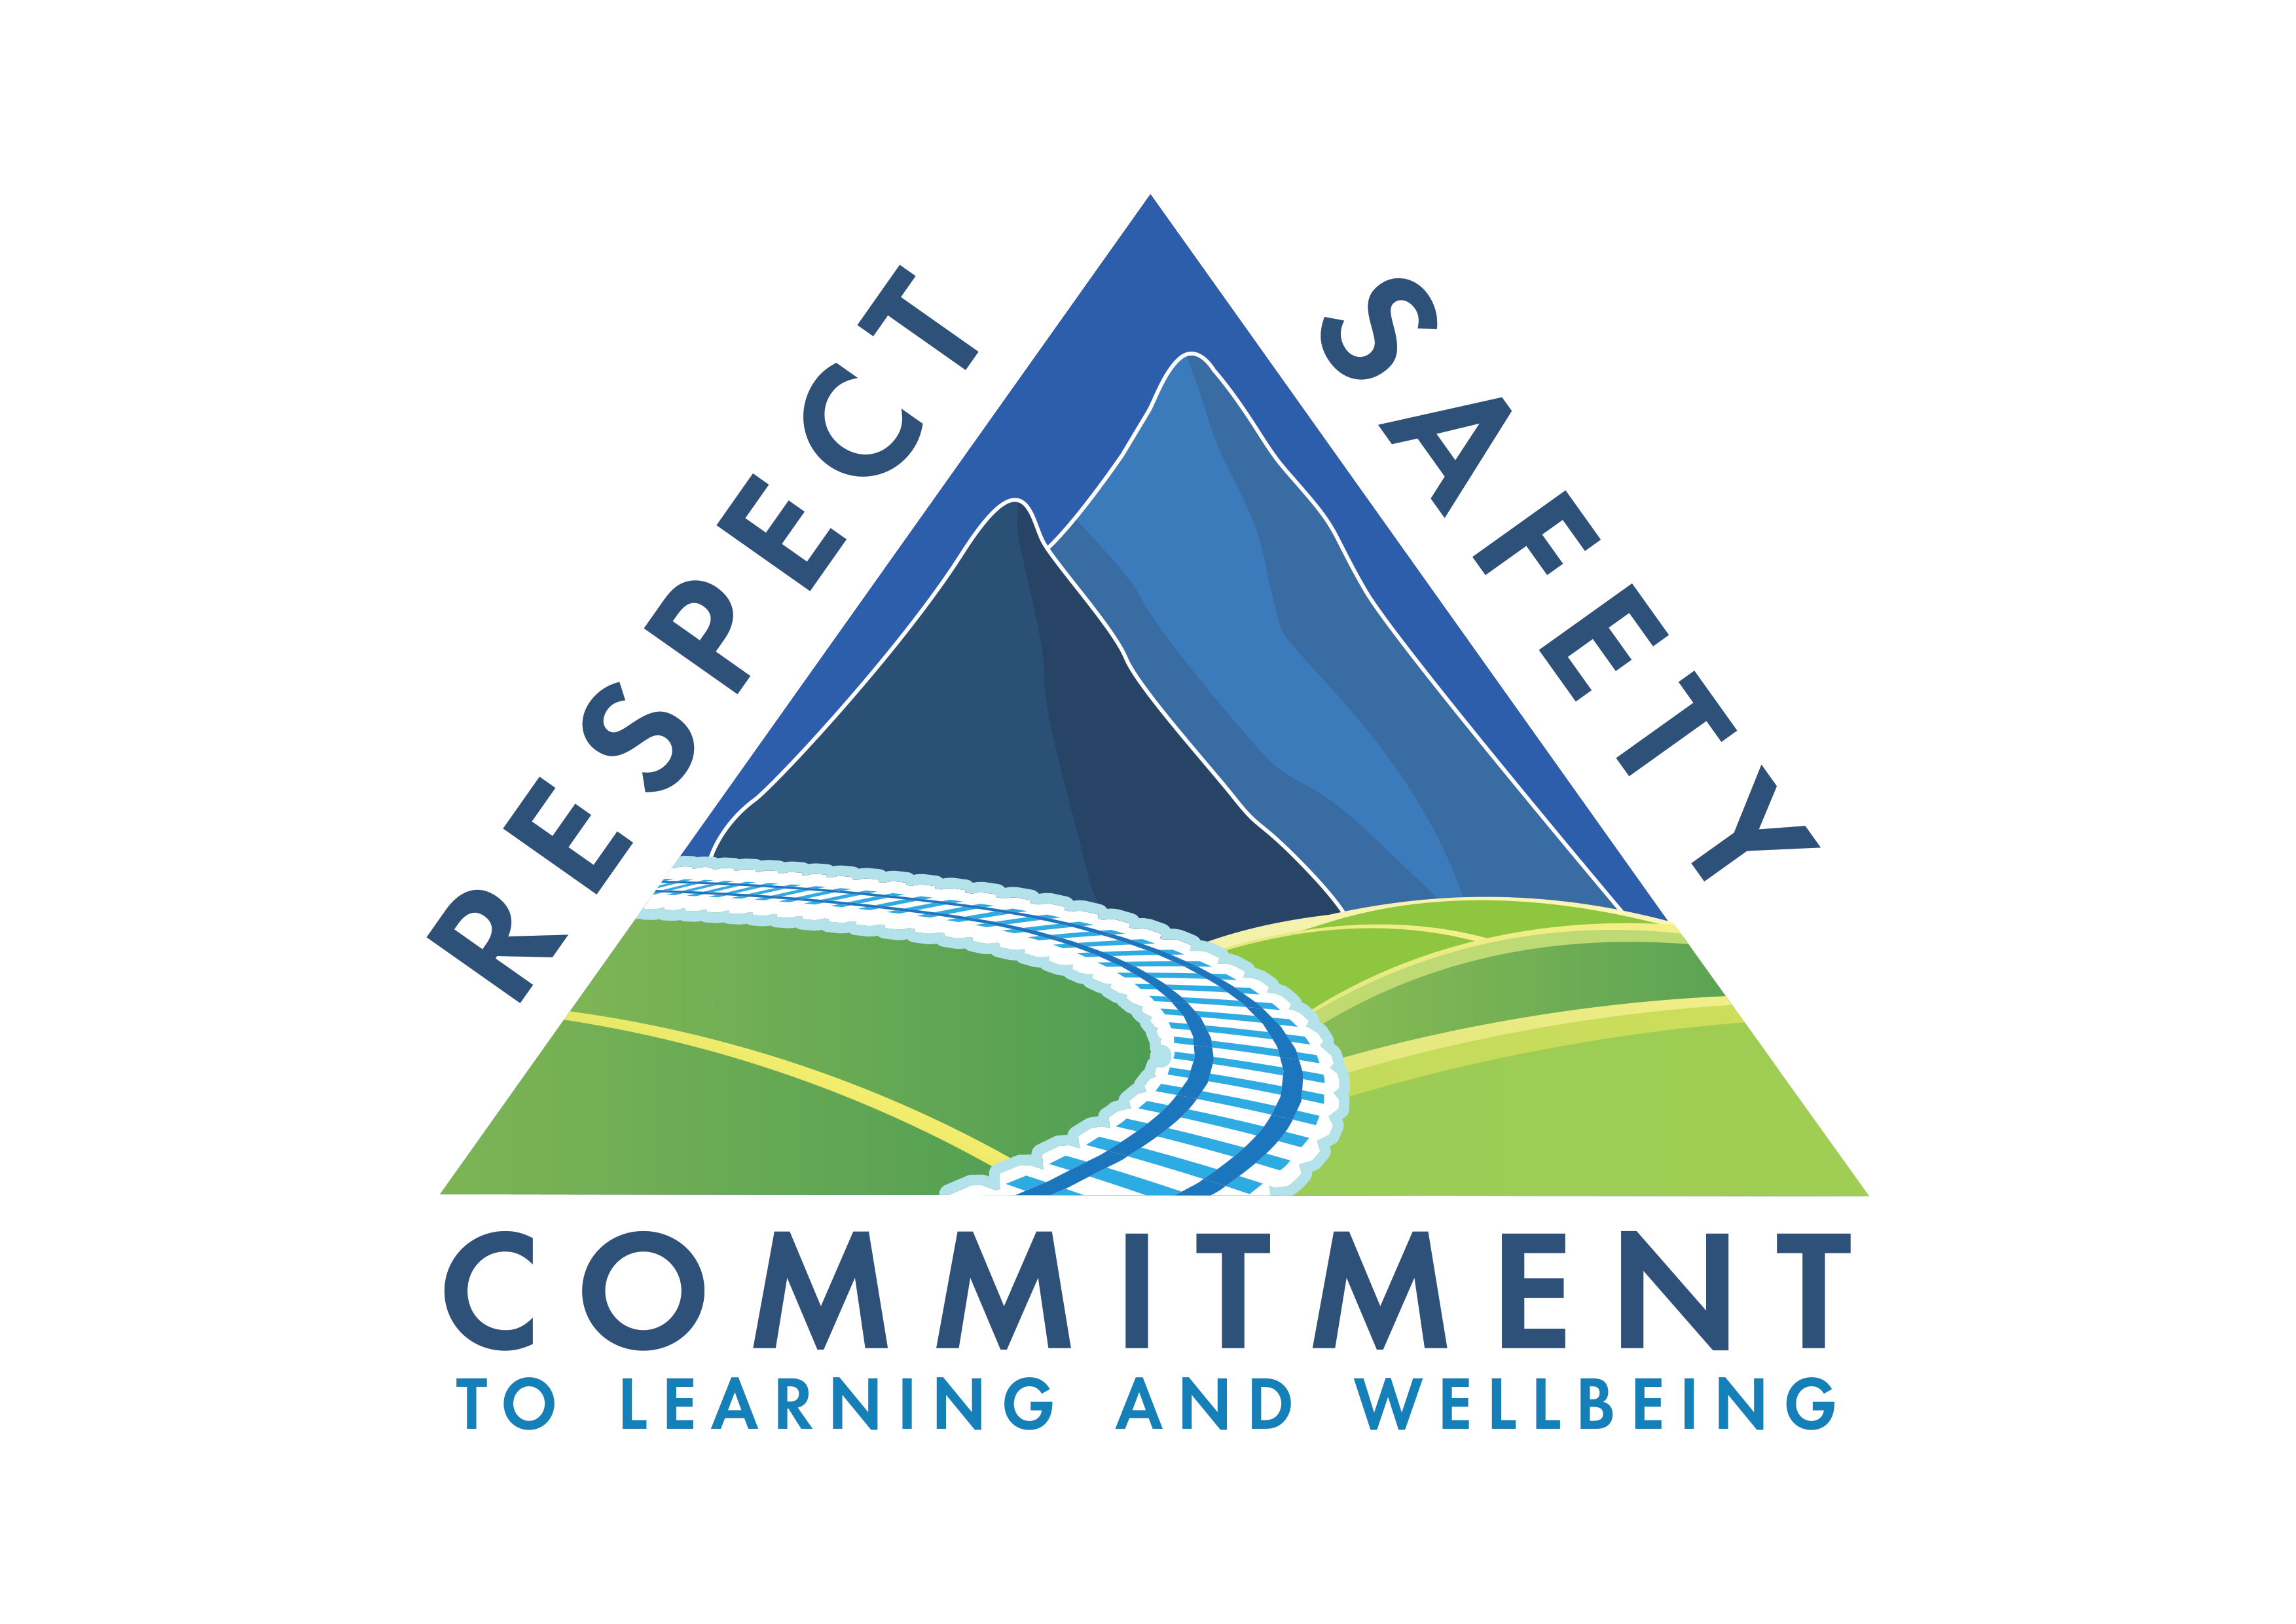 School Behavioural Expectations Image Respect Safety Commitment to Learning and Wellbeing